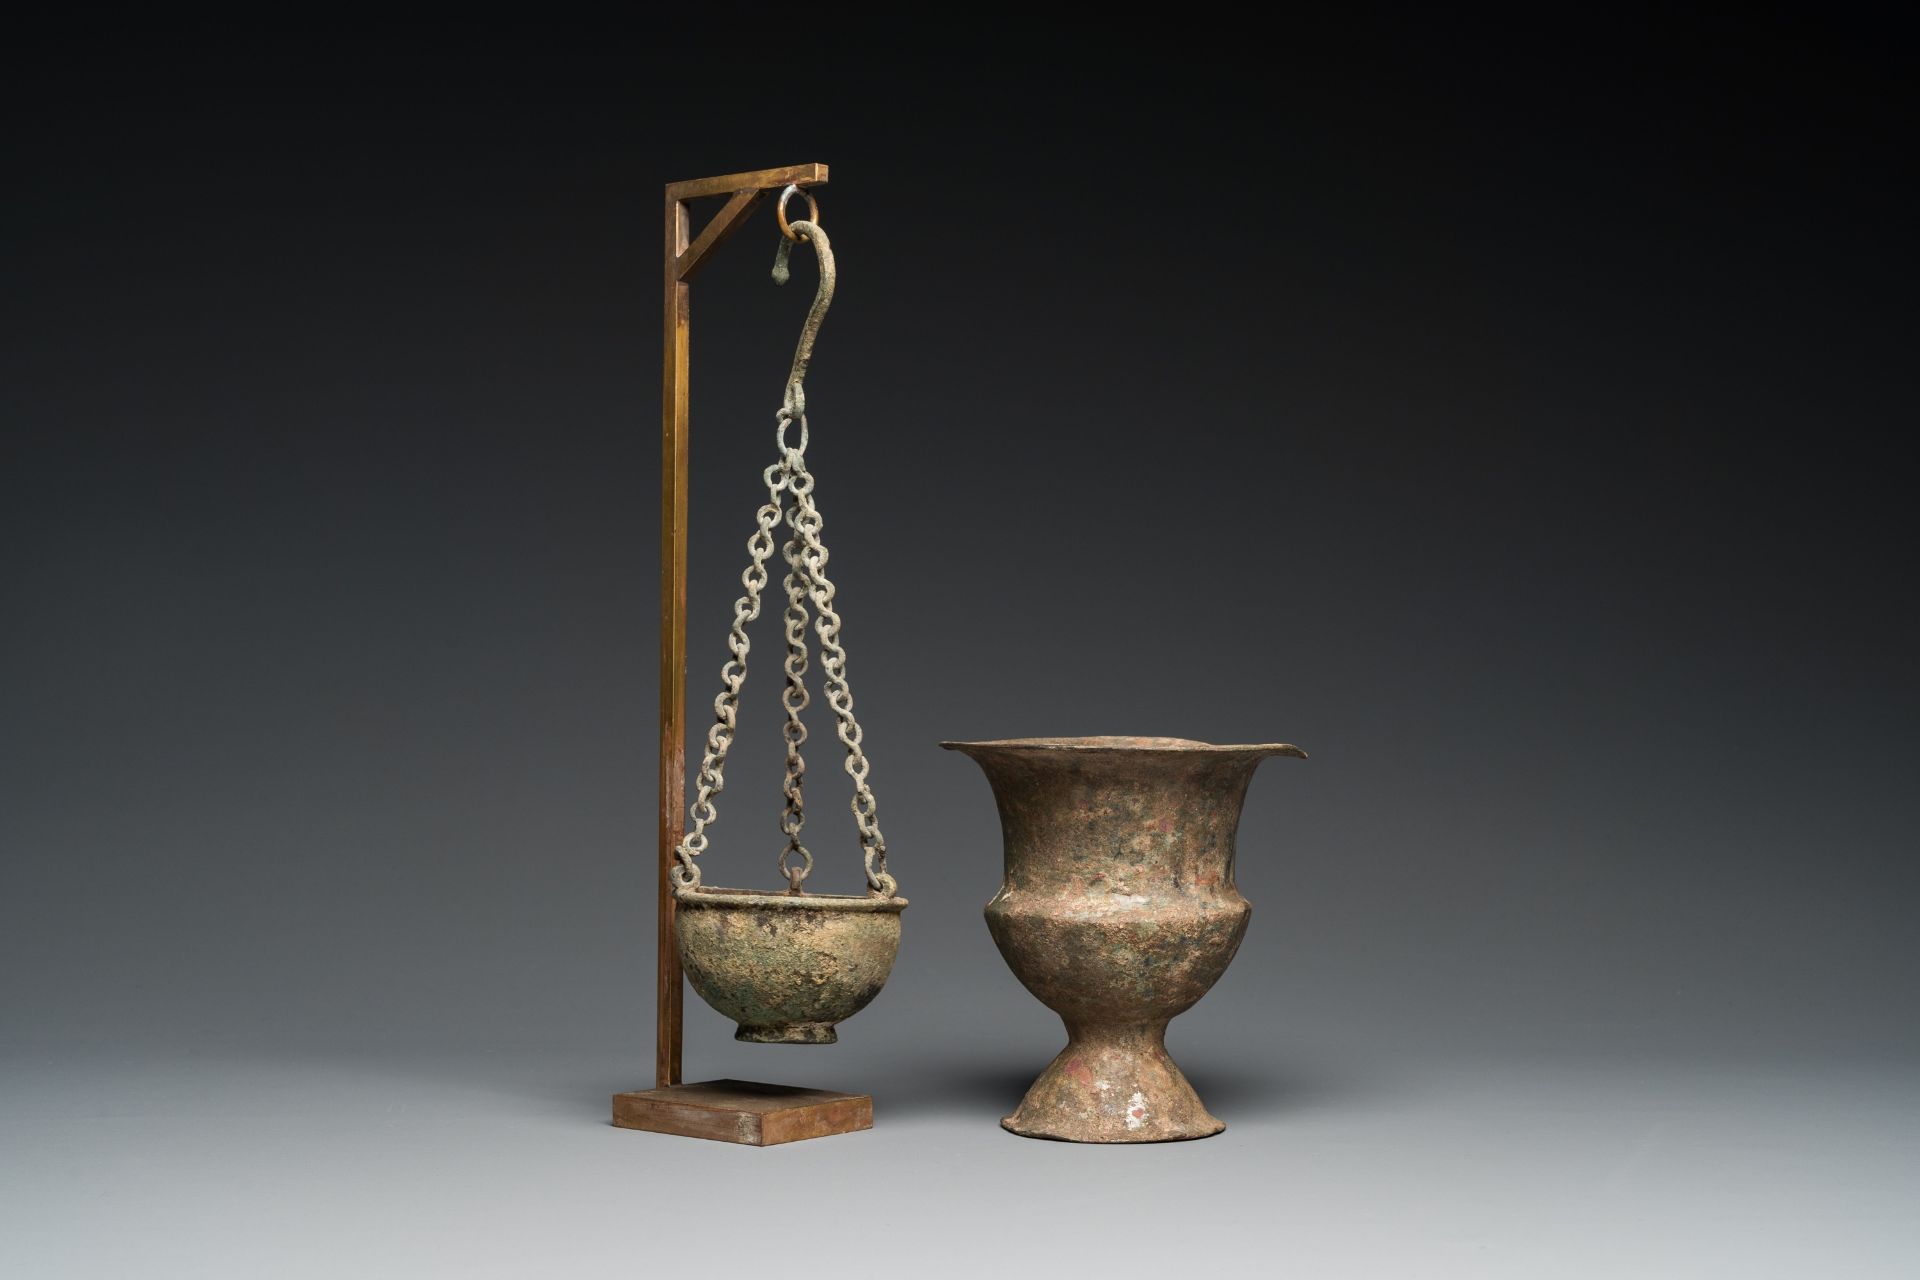 A Byzantine or Roman bronze vase and a hanging incense burner, 5/7th C. - Image 2 of 9